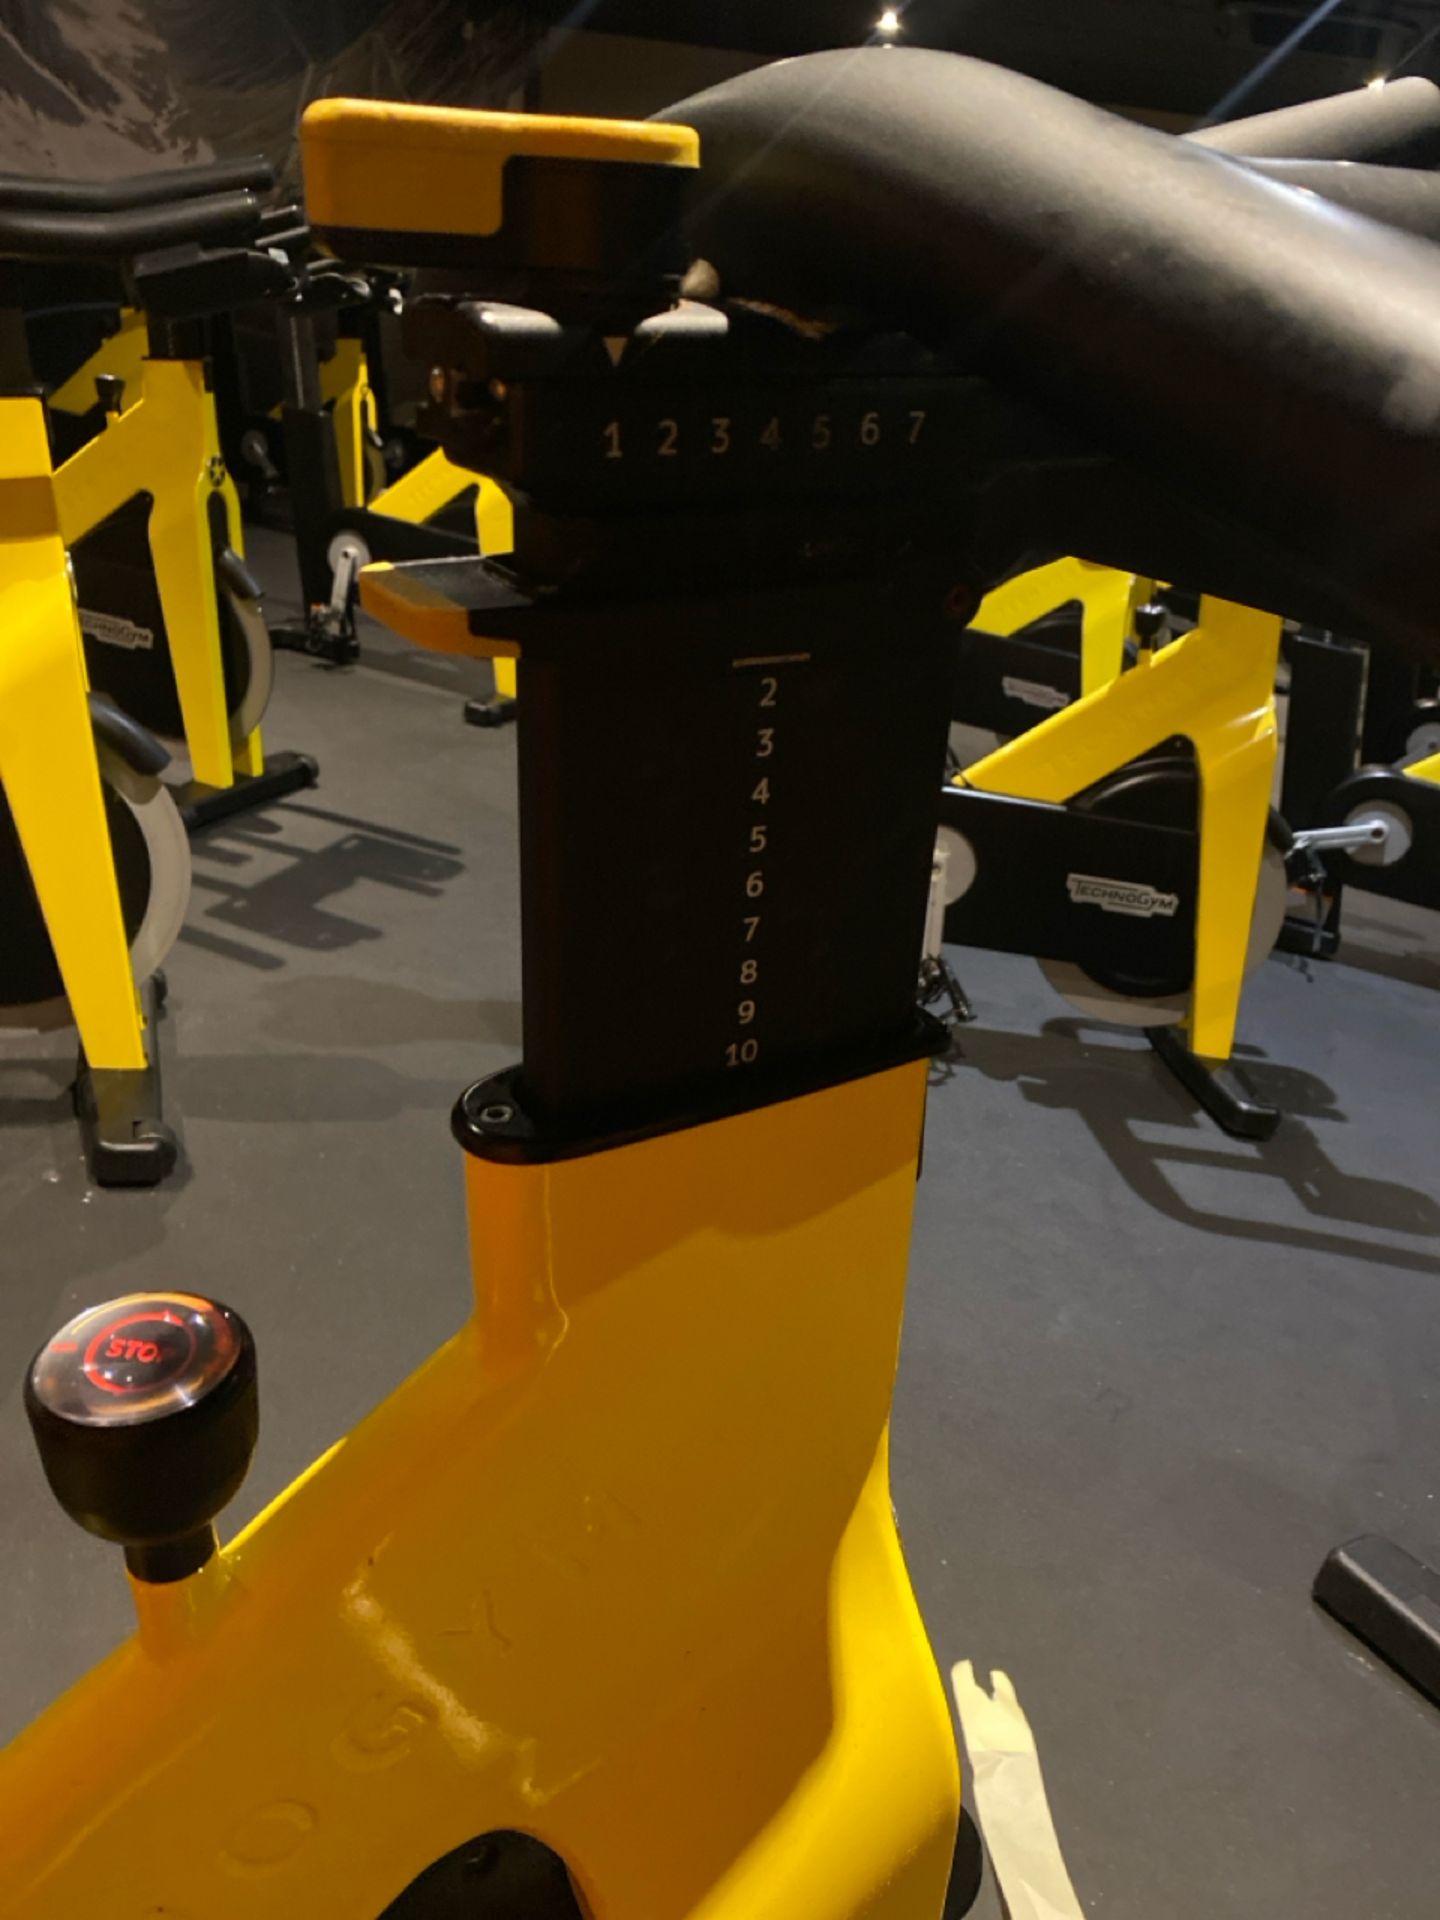 Technogym Group Cycle Ride Spin Bike - Image 6 of 8